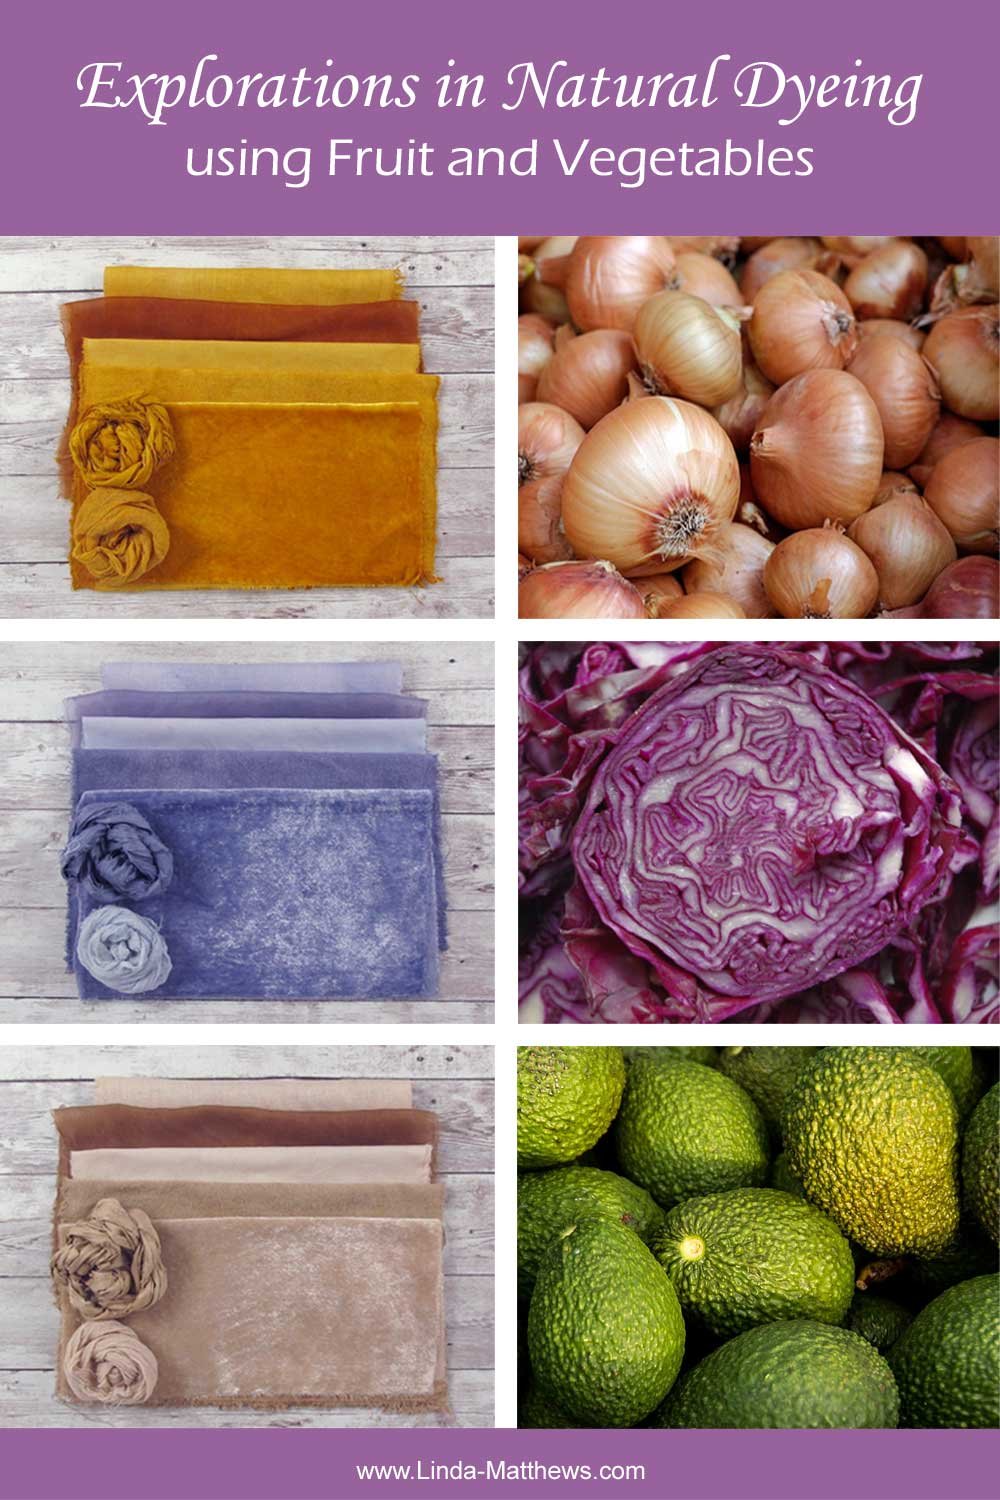 Explorations in Natural Dyeing using Fruit and Vegetables